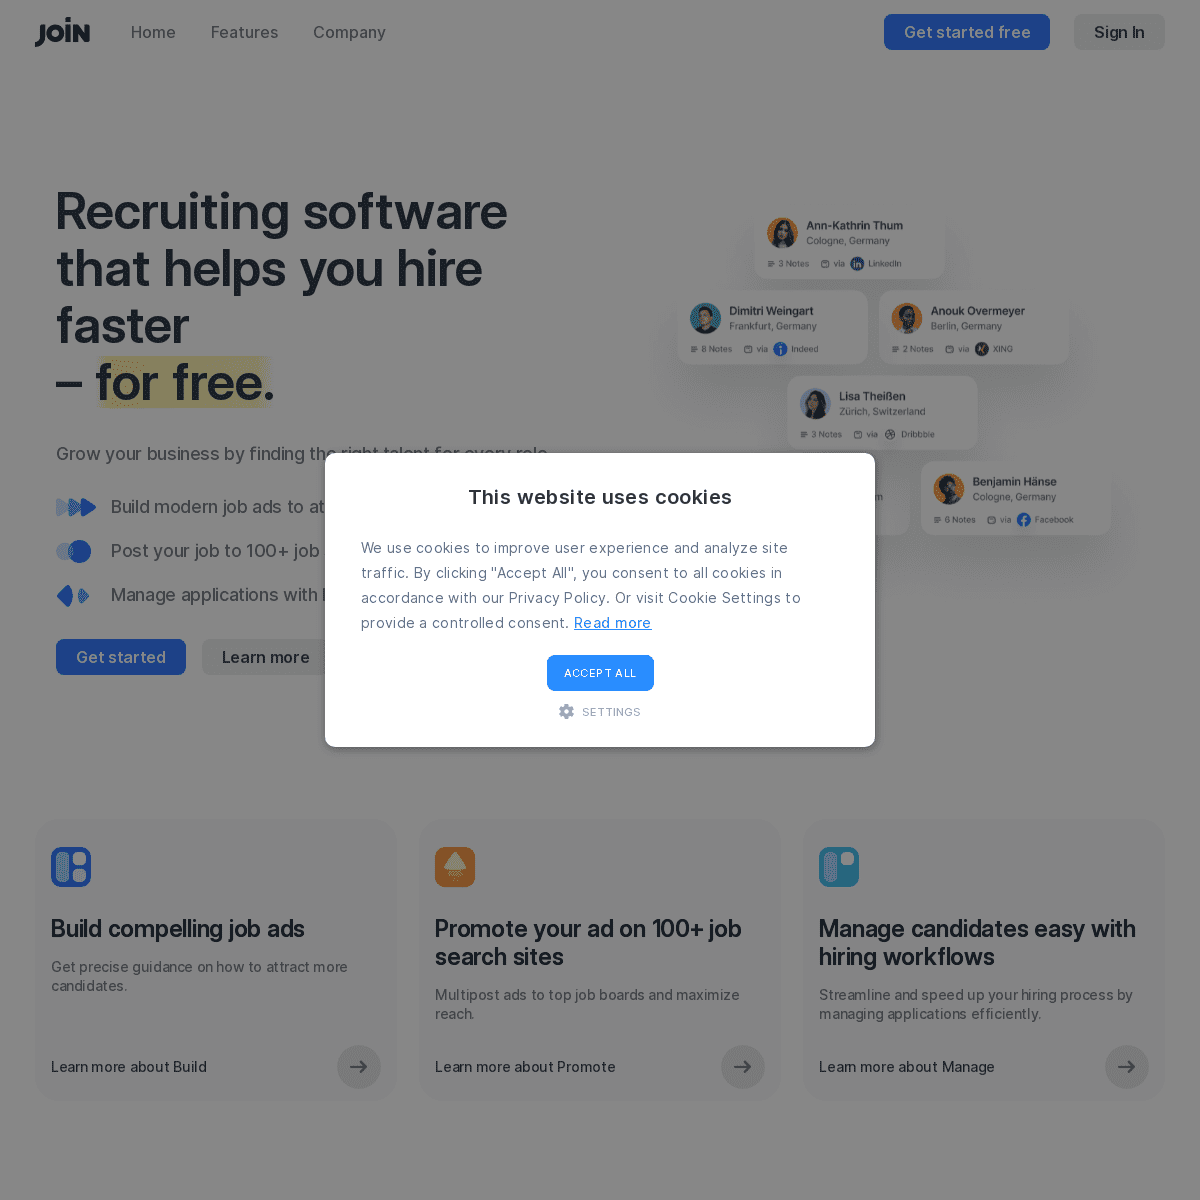 A complete backup of https://join.com